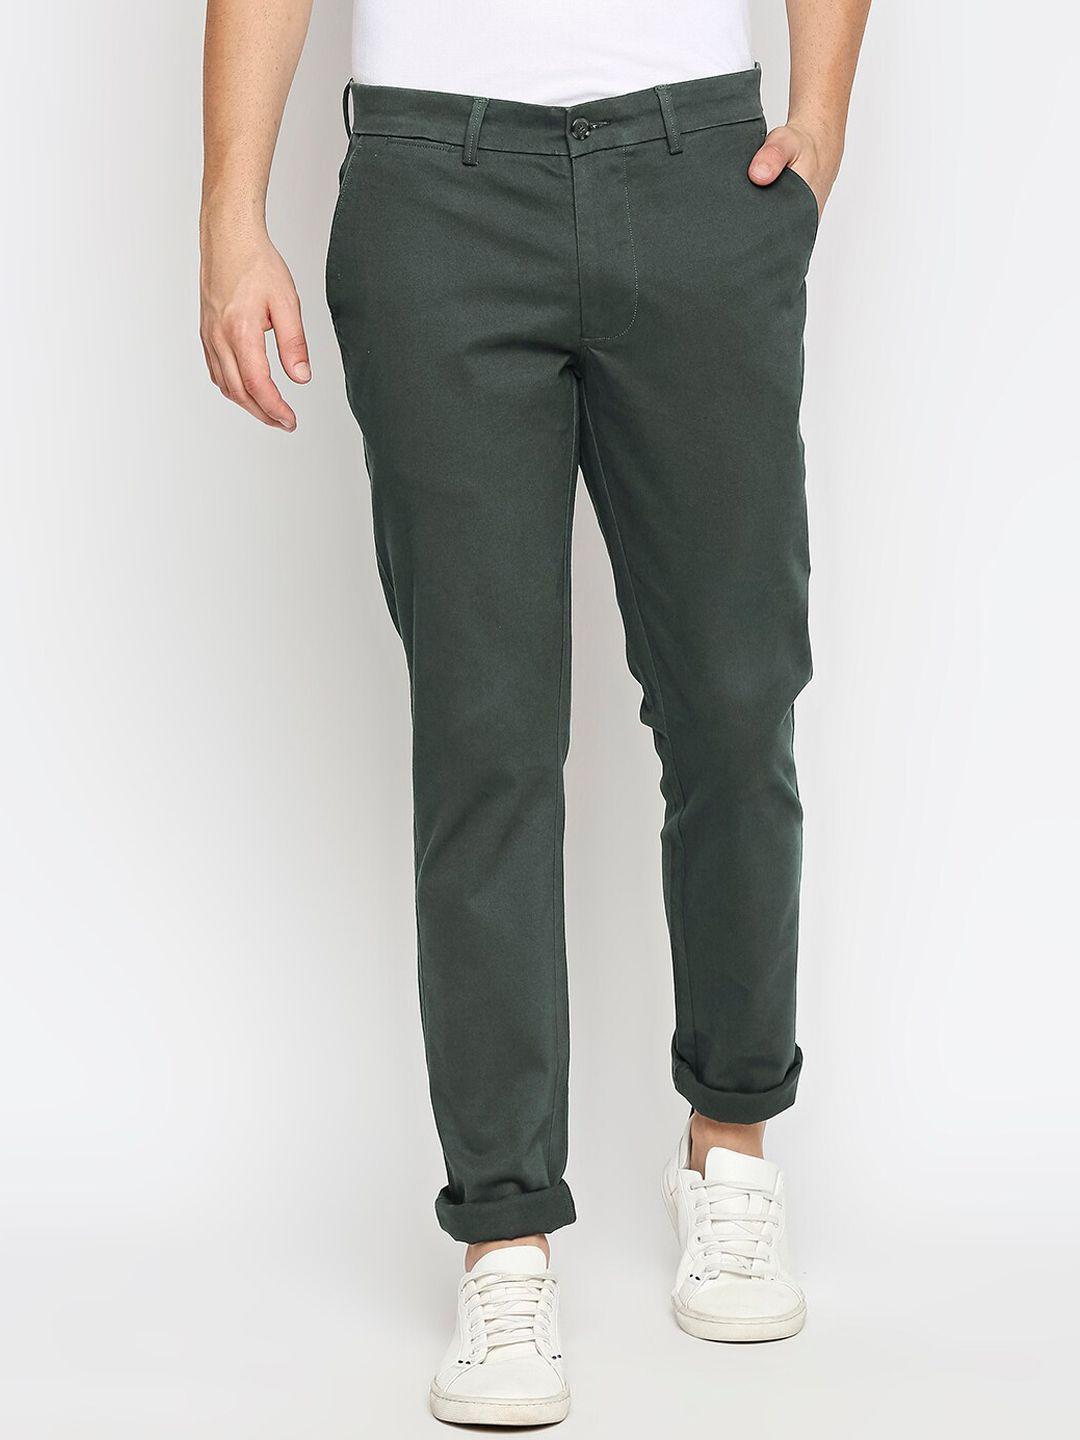 basics men olive green tapered fit trousers